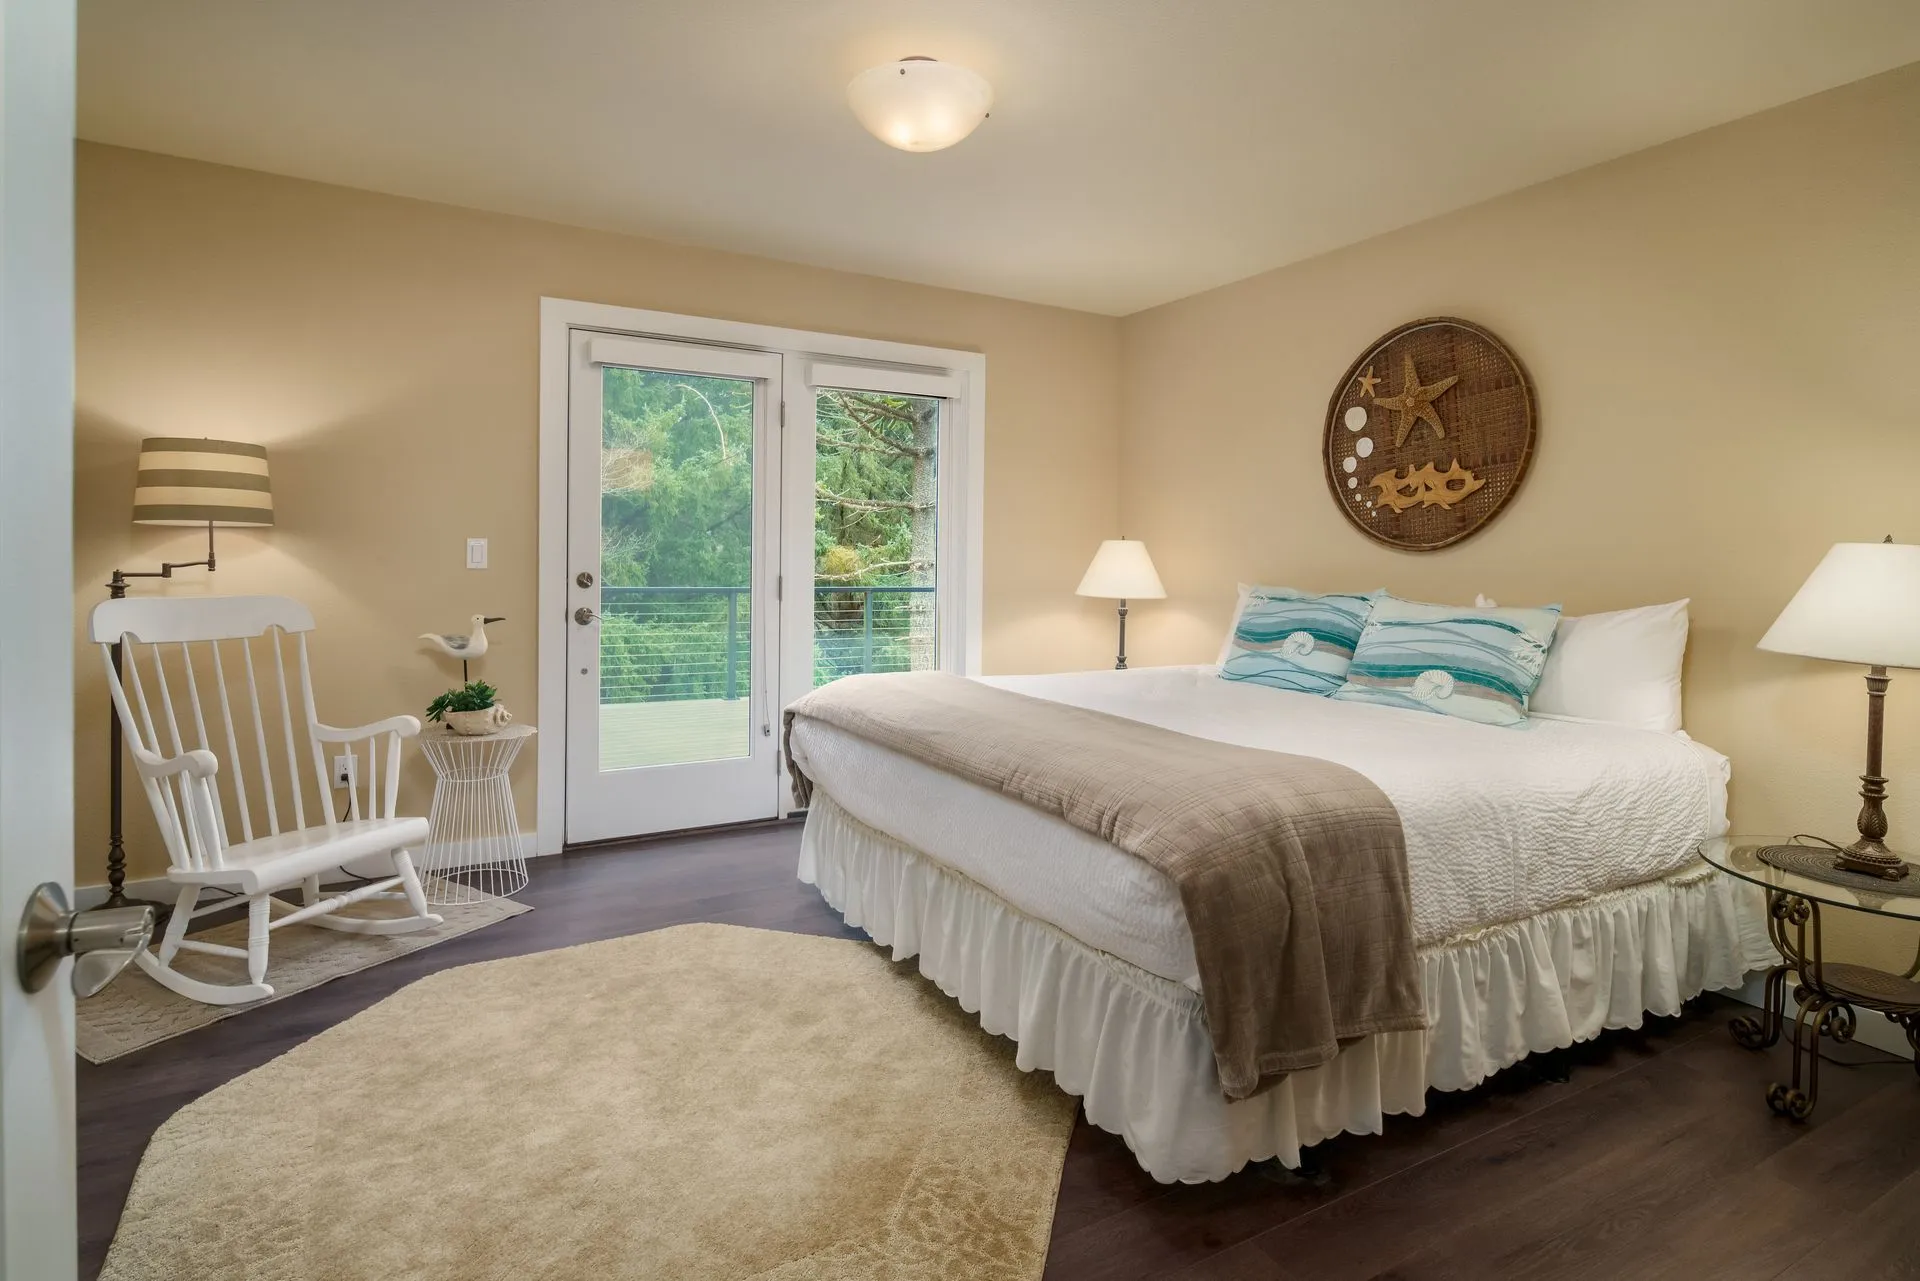 Vacation Rental in Cannon Beach, Anchor's Retreat bedroom with balcony and rocking chair